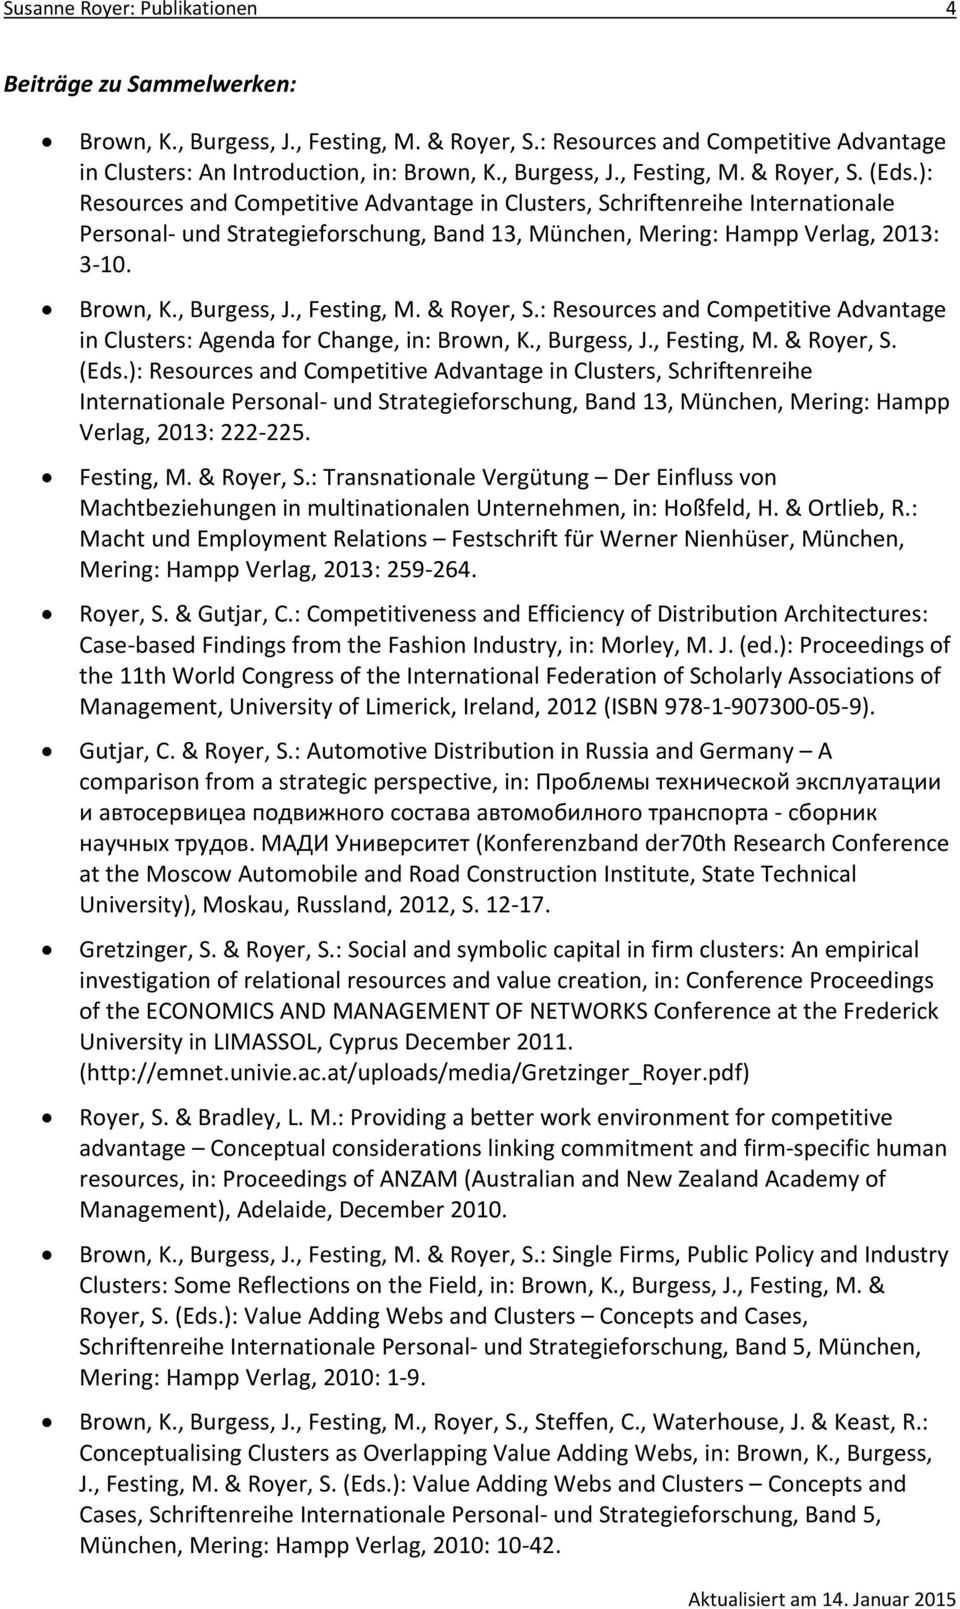 , Festing, M. & Royer, S.: Resources and Competitive Advantage in Clusters: Agenda for Change, in: Brown, K., Burgess, J., Festing, M. & Royer, S. (Eds.